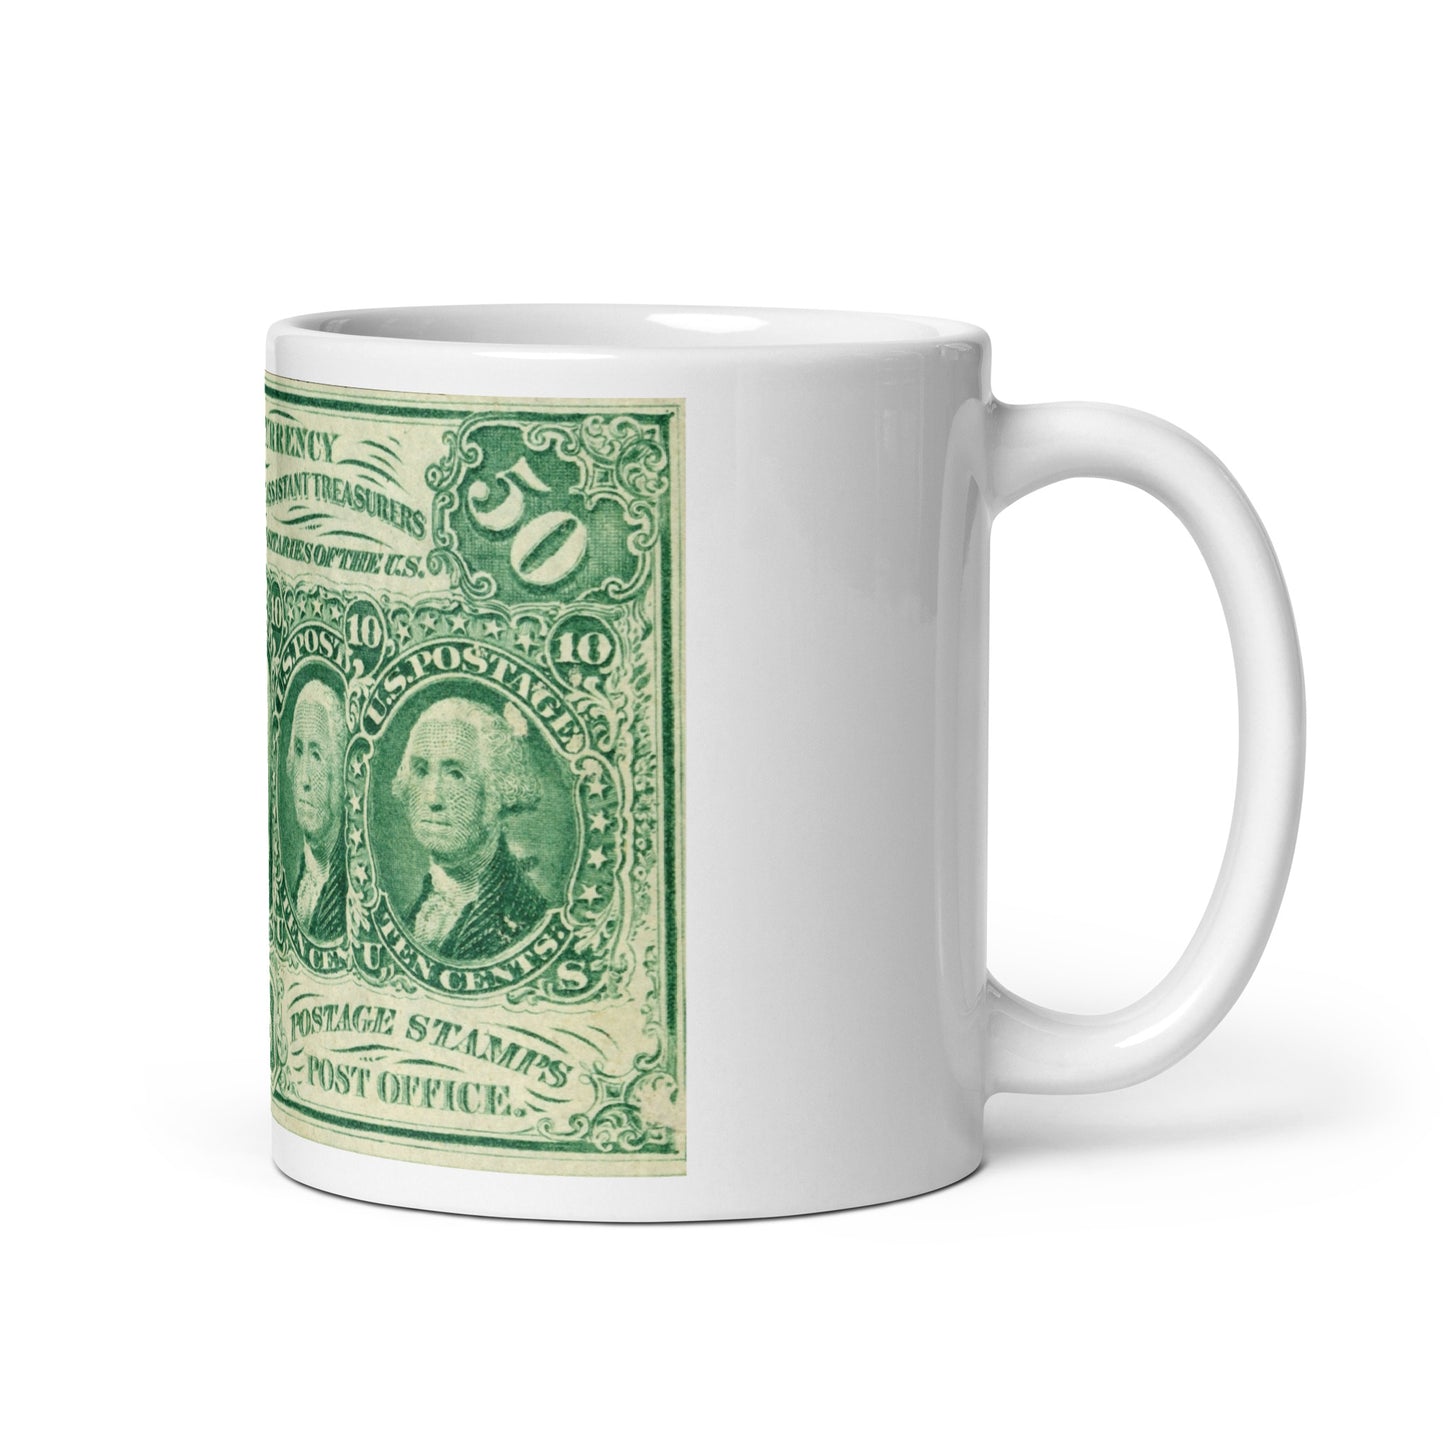 50 Cents 1ST Issue Fractional Currency Edition - Classic Currency Collector's Mug